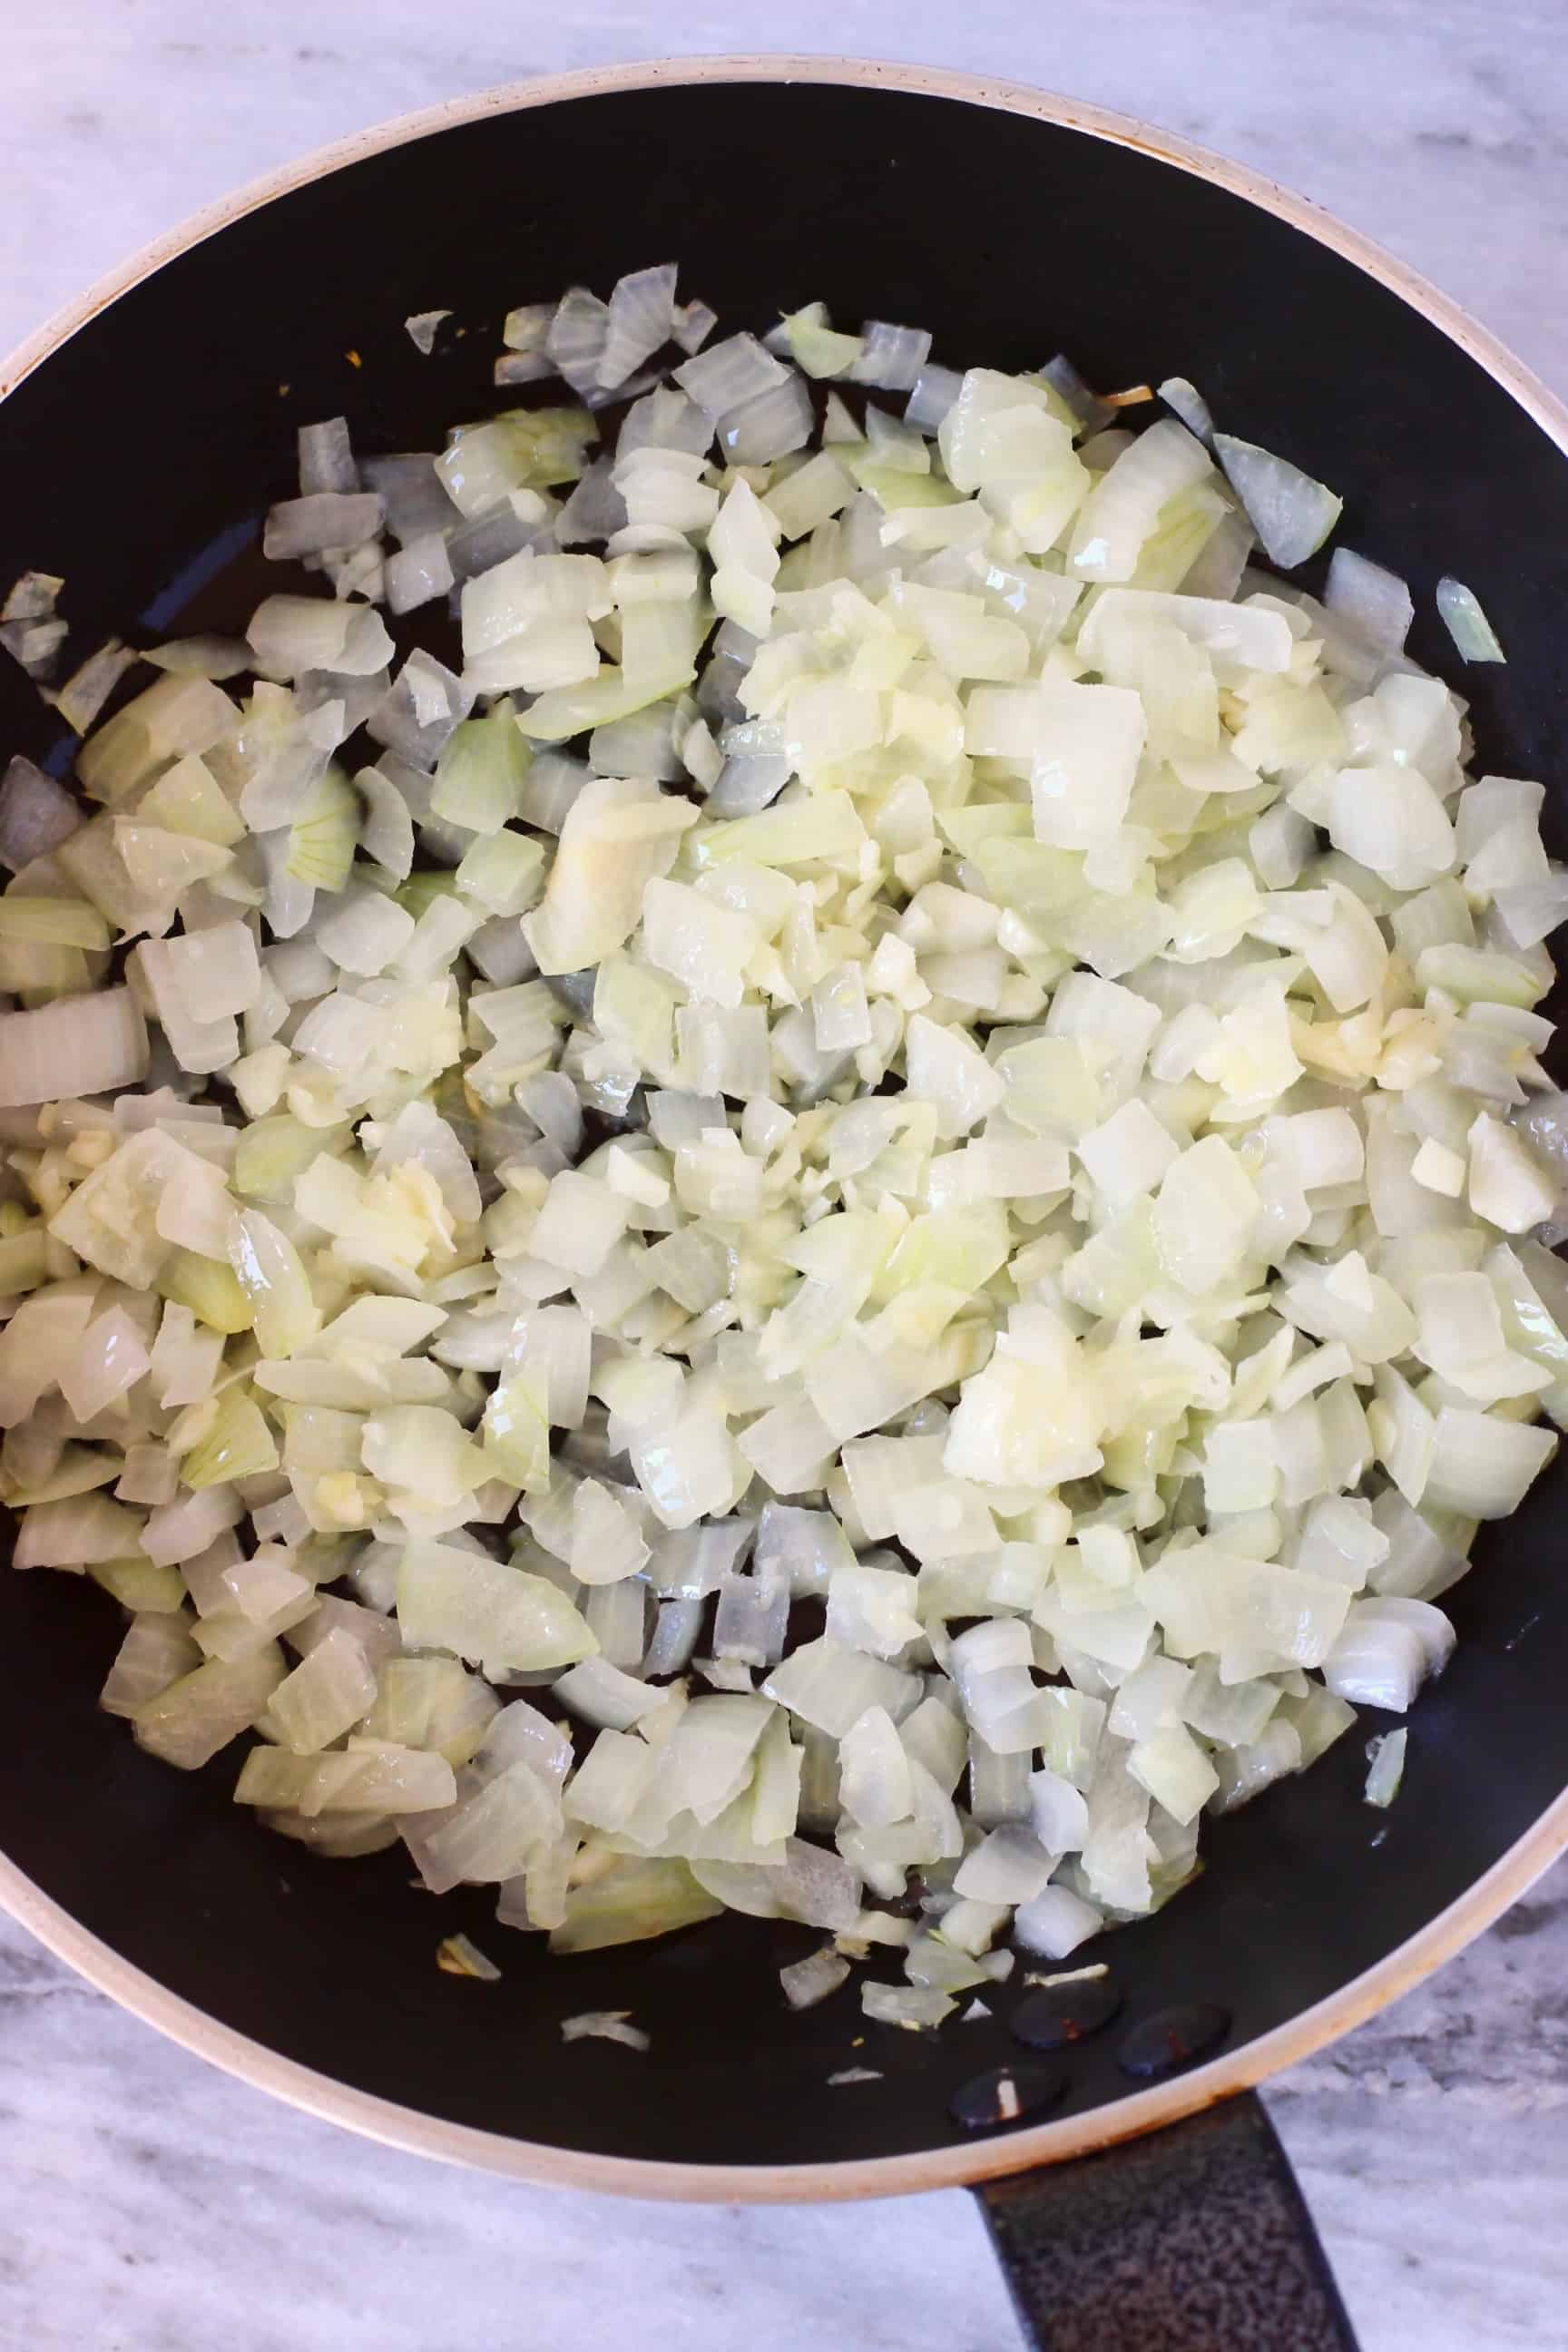 Diced onion and chopped garlic being fried in a black frying pan